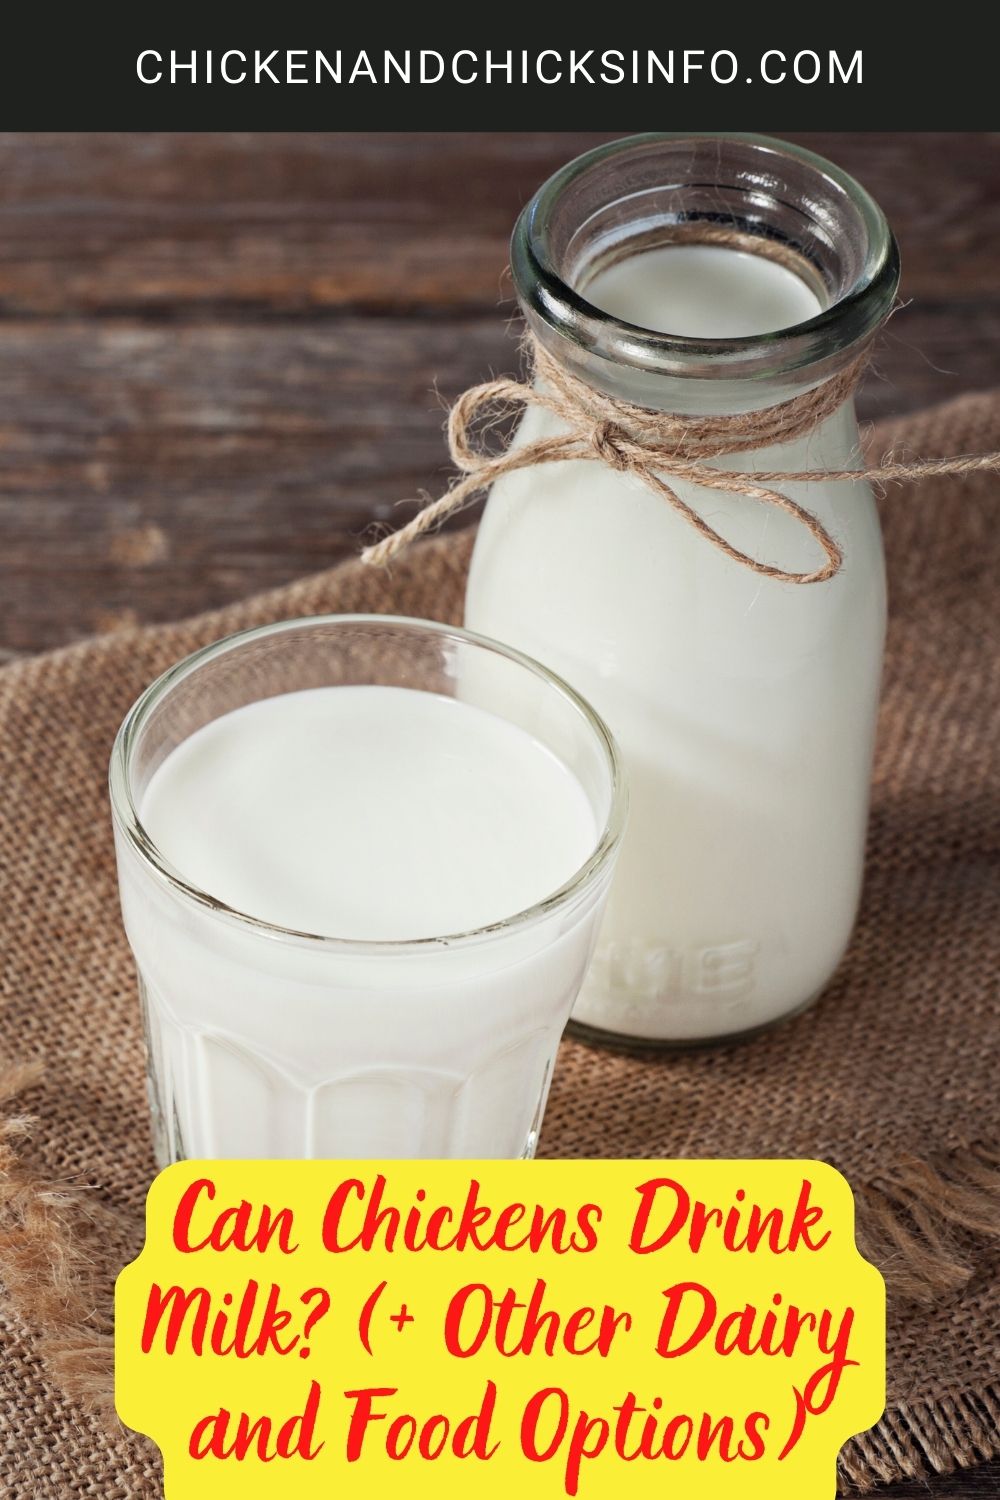 Can Chickens Drink Milk? (+ Other Dairy and Food Options) poster.
